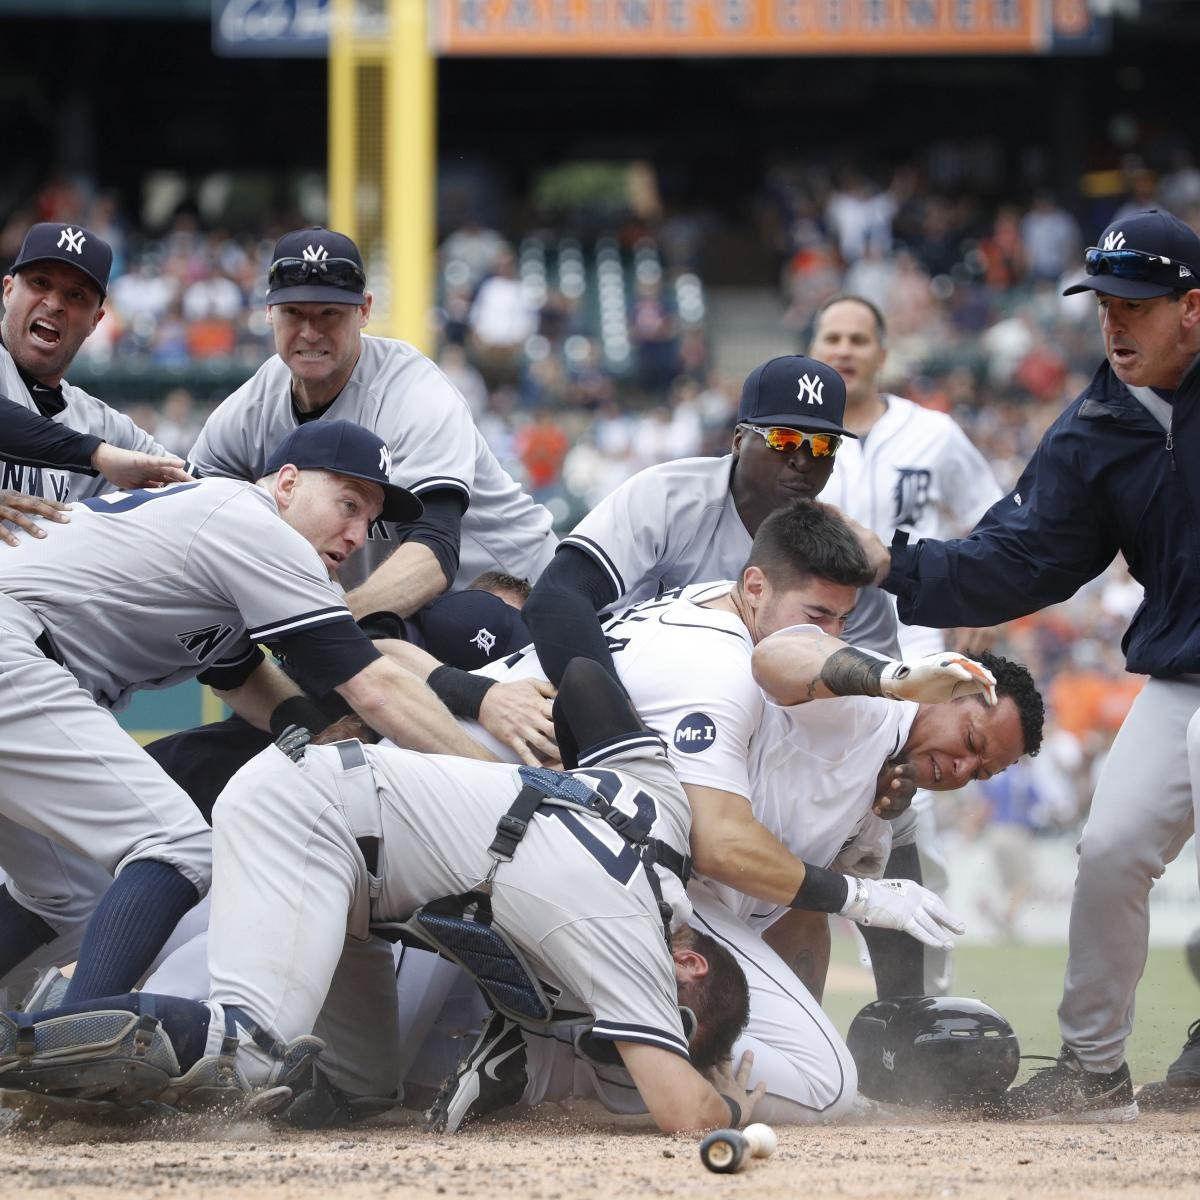 Austin Romine Suspension for Brawl vs. Tigers Reduced to 1 Game